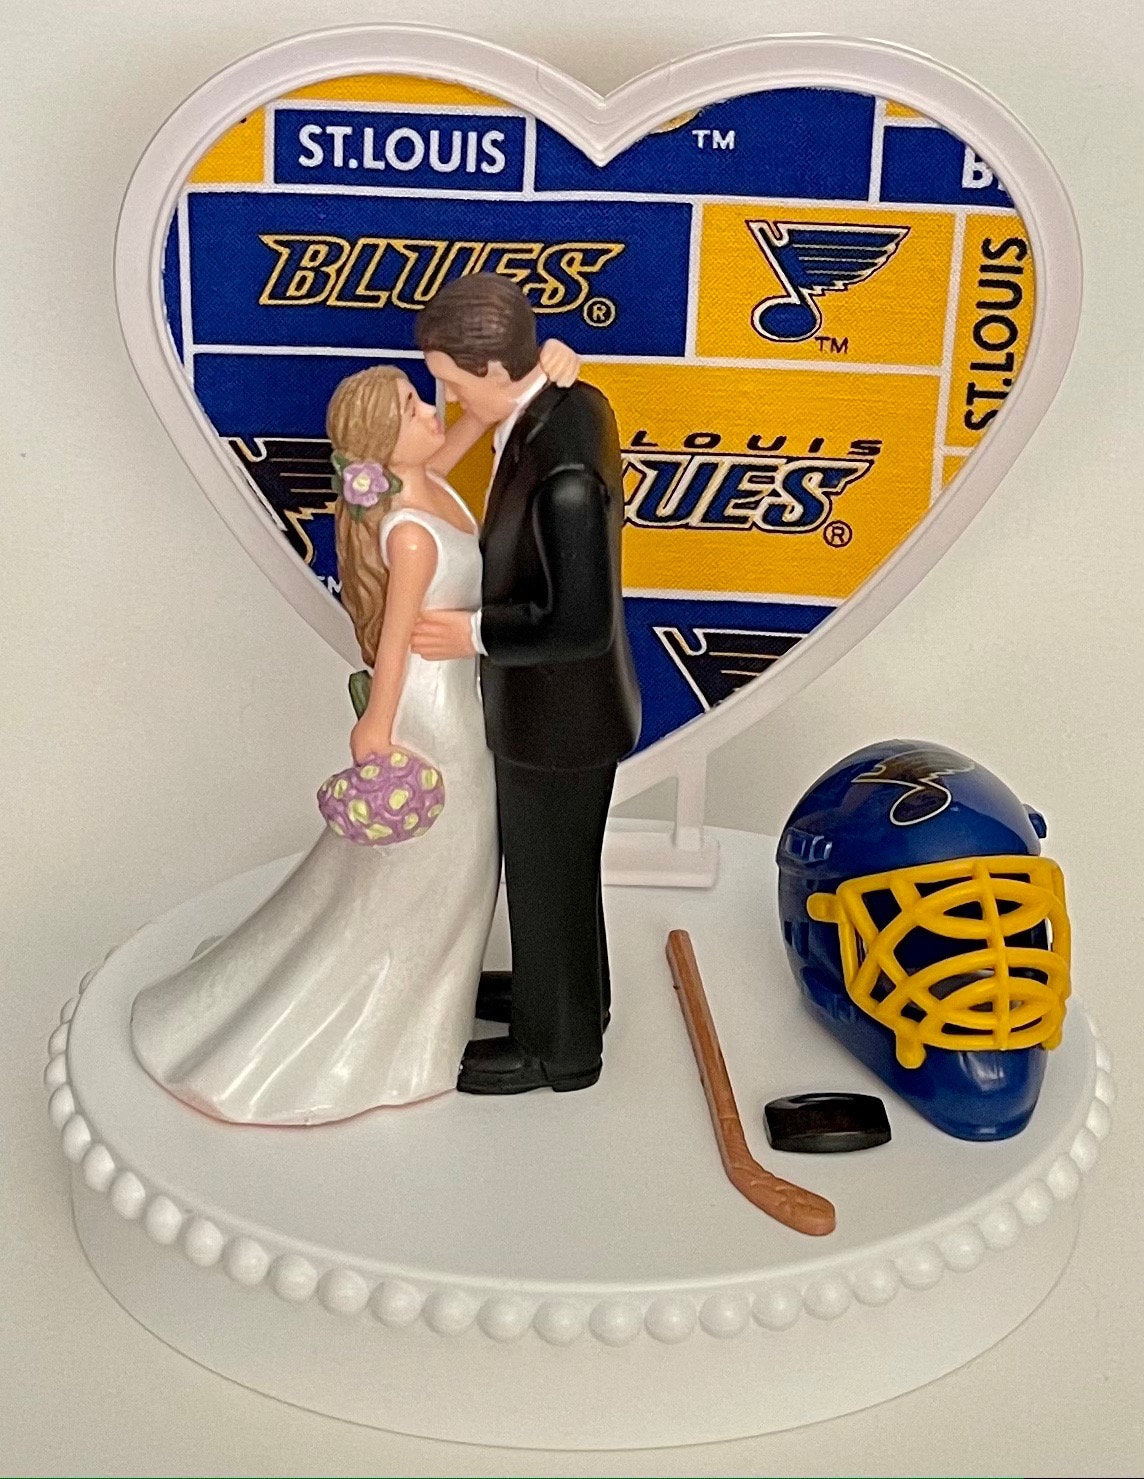 Wedding Cake Topper St. Louis Blues Hockey Themed Beautiful Long-Haired Bride and Groom Fun Groom's Cake Top Shower Gift Idea Reception